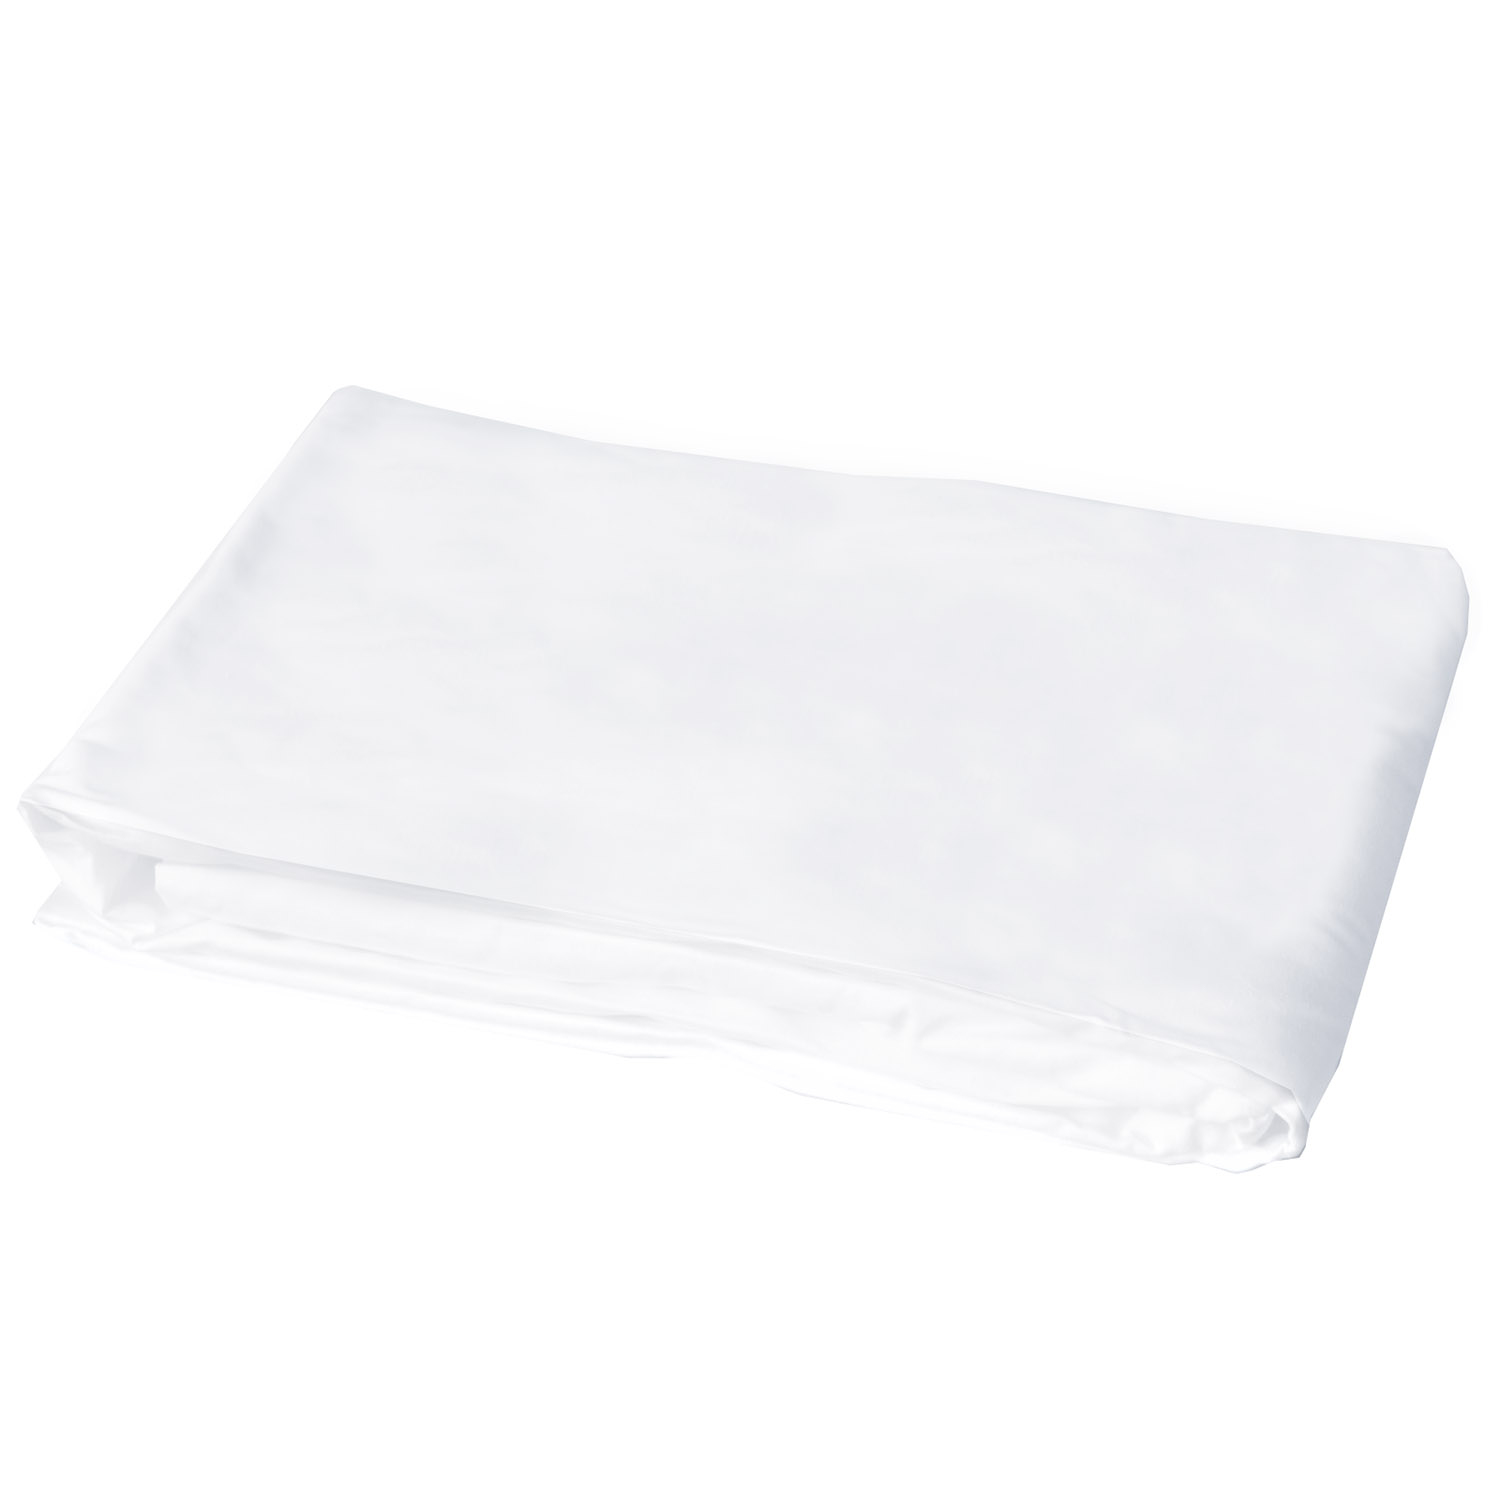 Bed Sheet Bed Sheet 140 160 180 cm Fitted Sheet 100% Cotton White